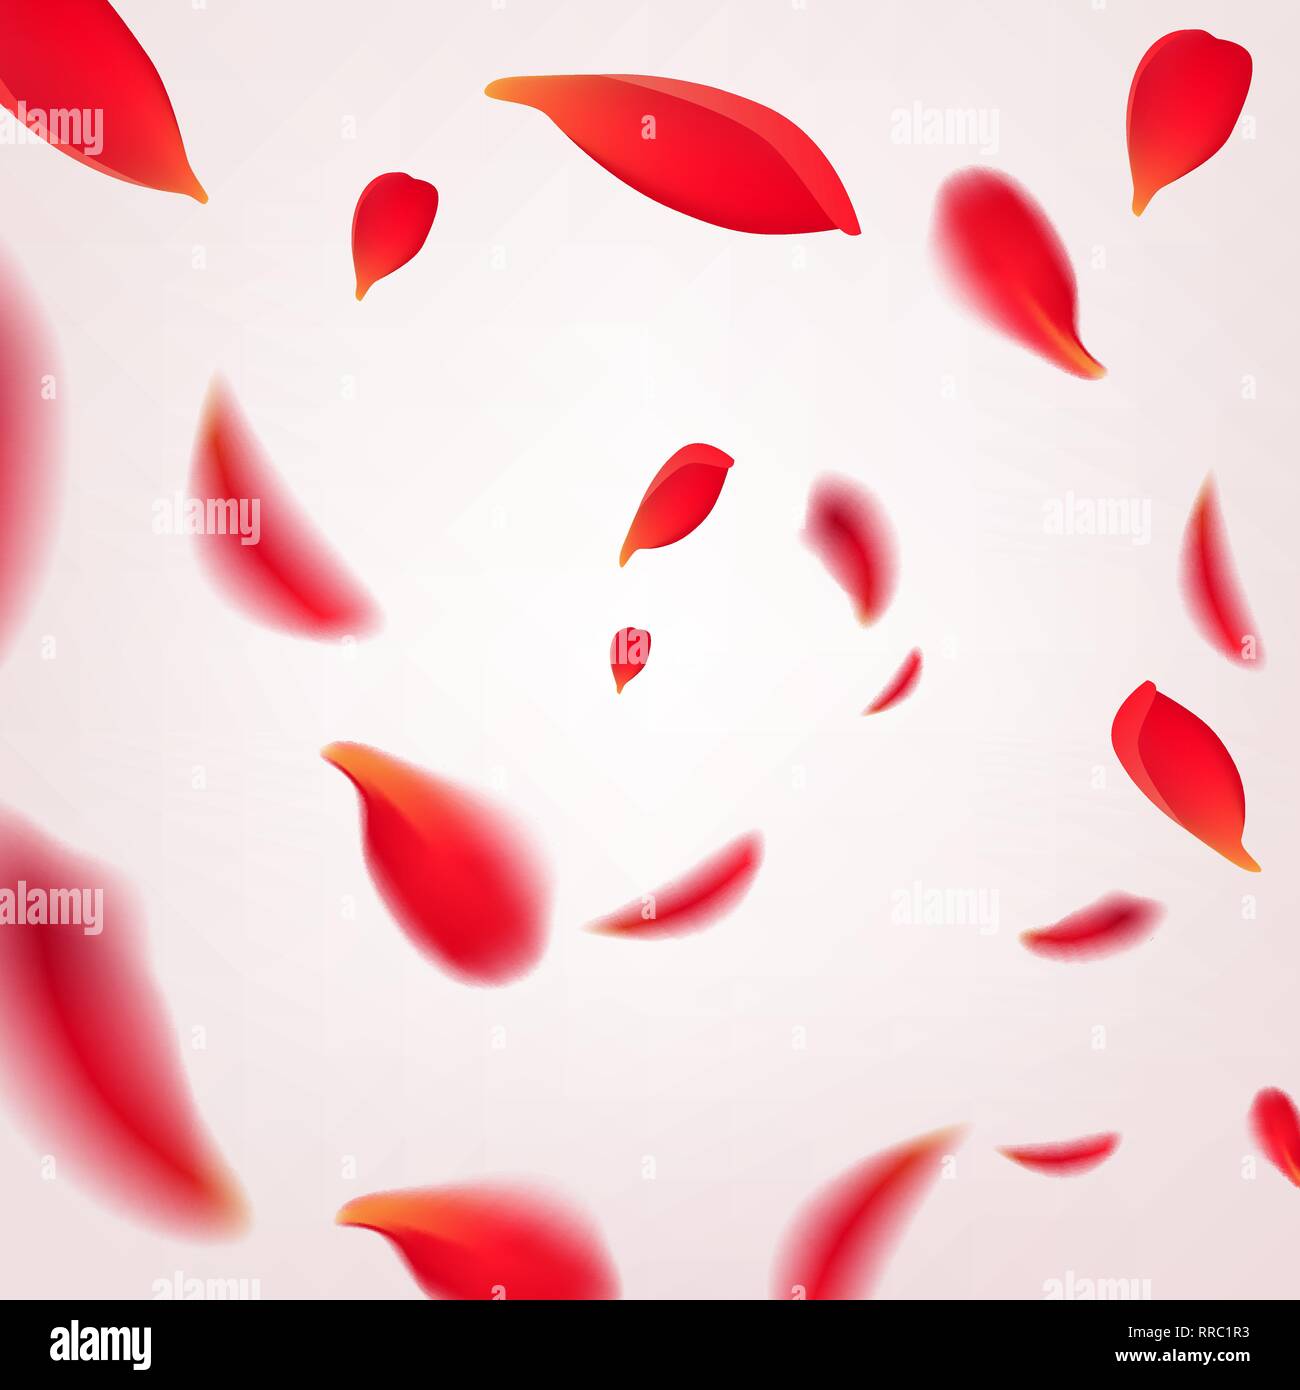 Falling swirl of red rose petals isolated on white background. Vector illustration with beauty roses petals frame, applicable for design of greeting Stock Vector